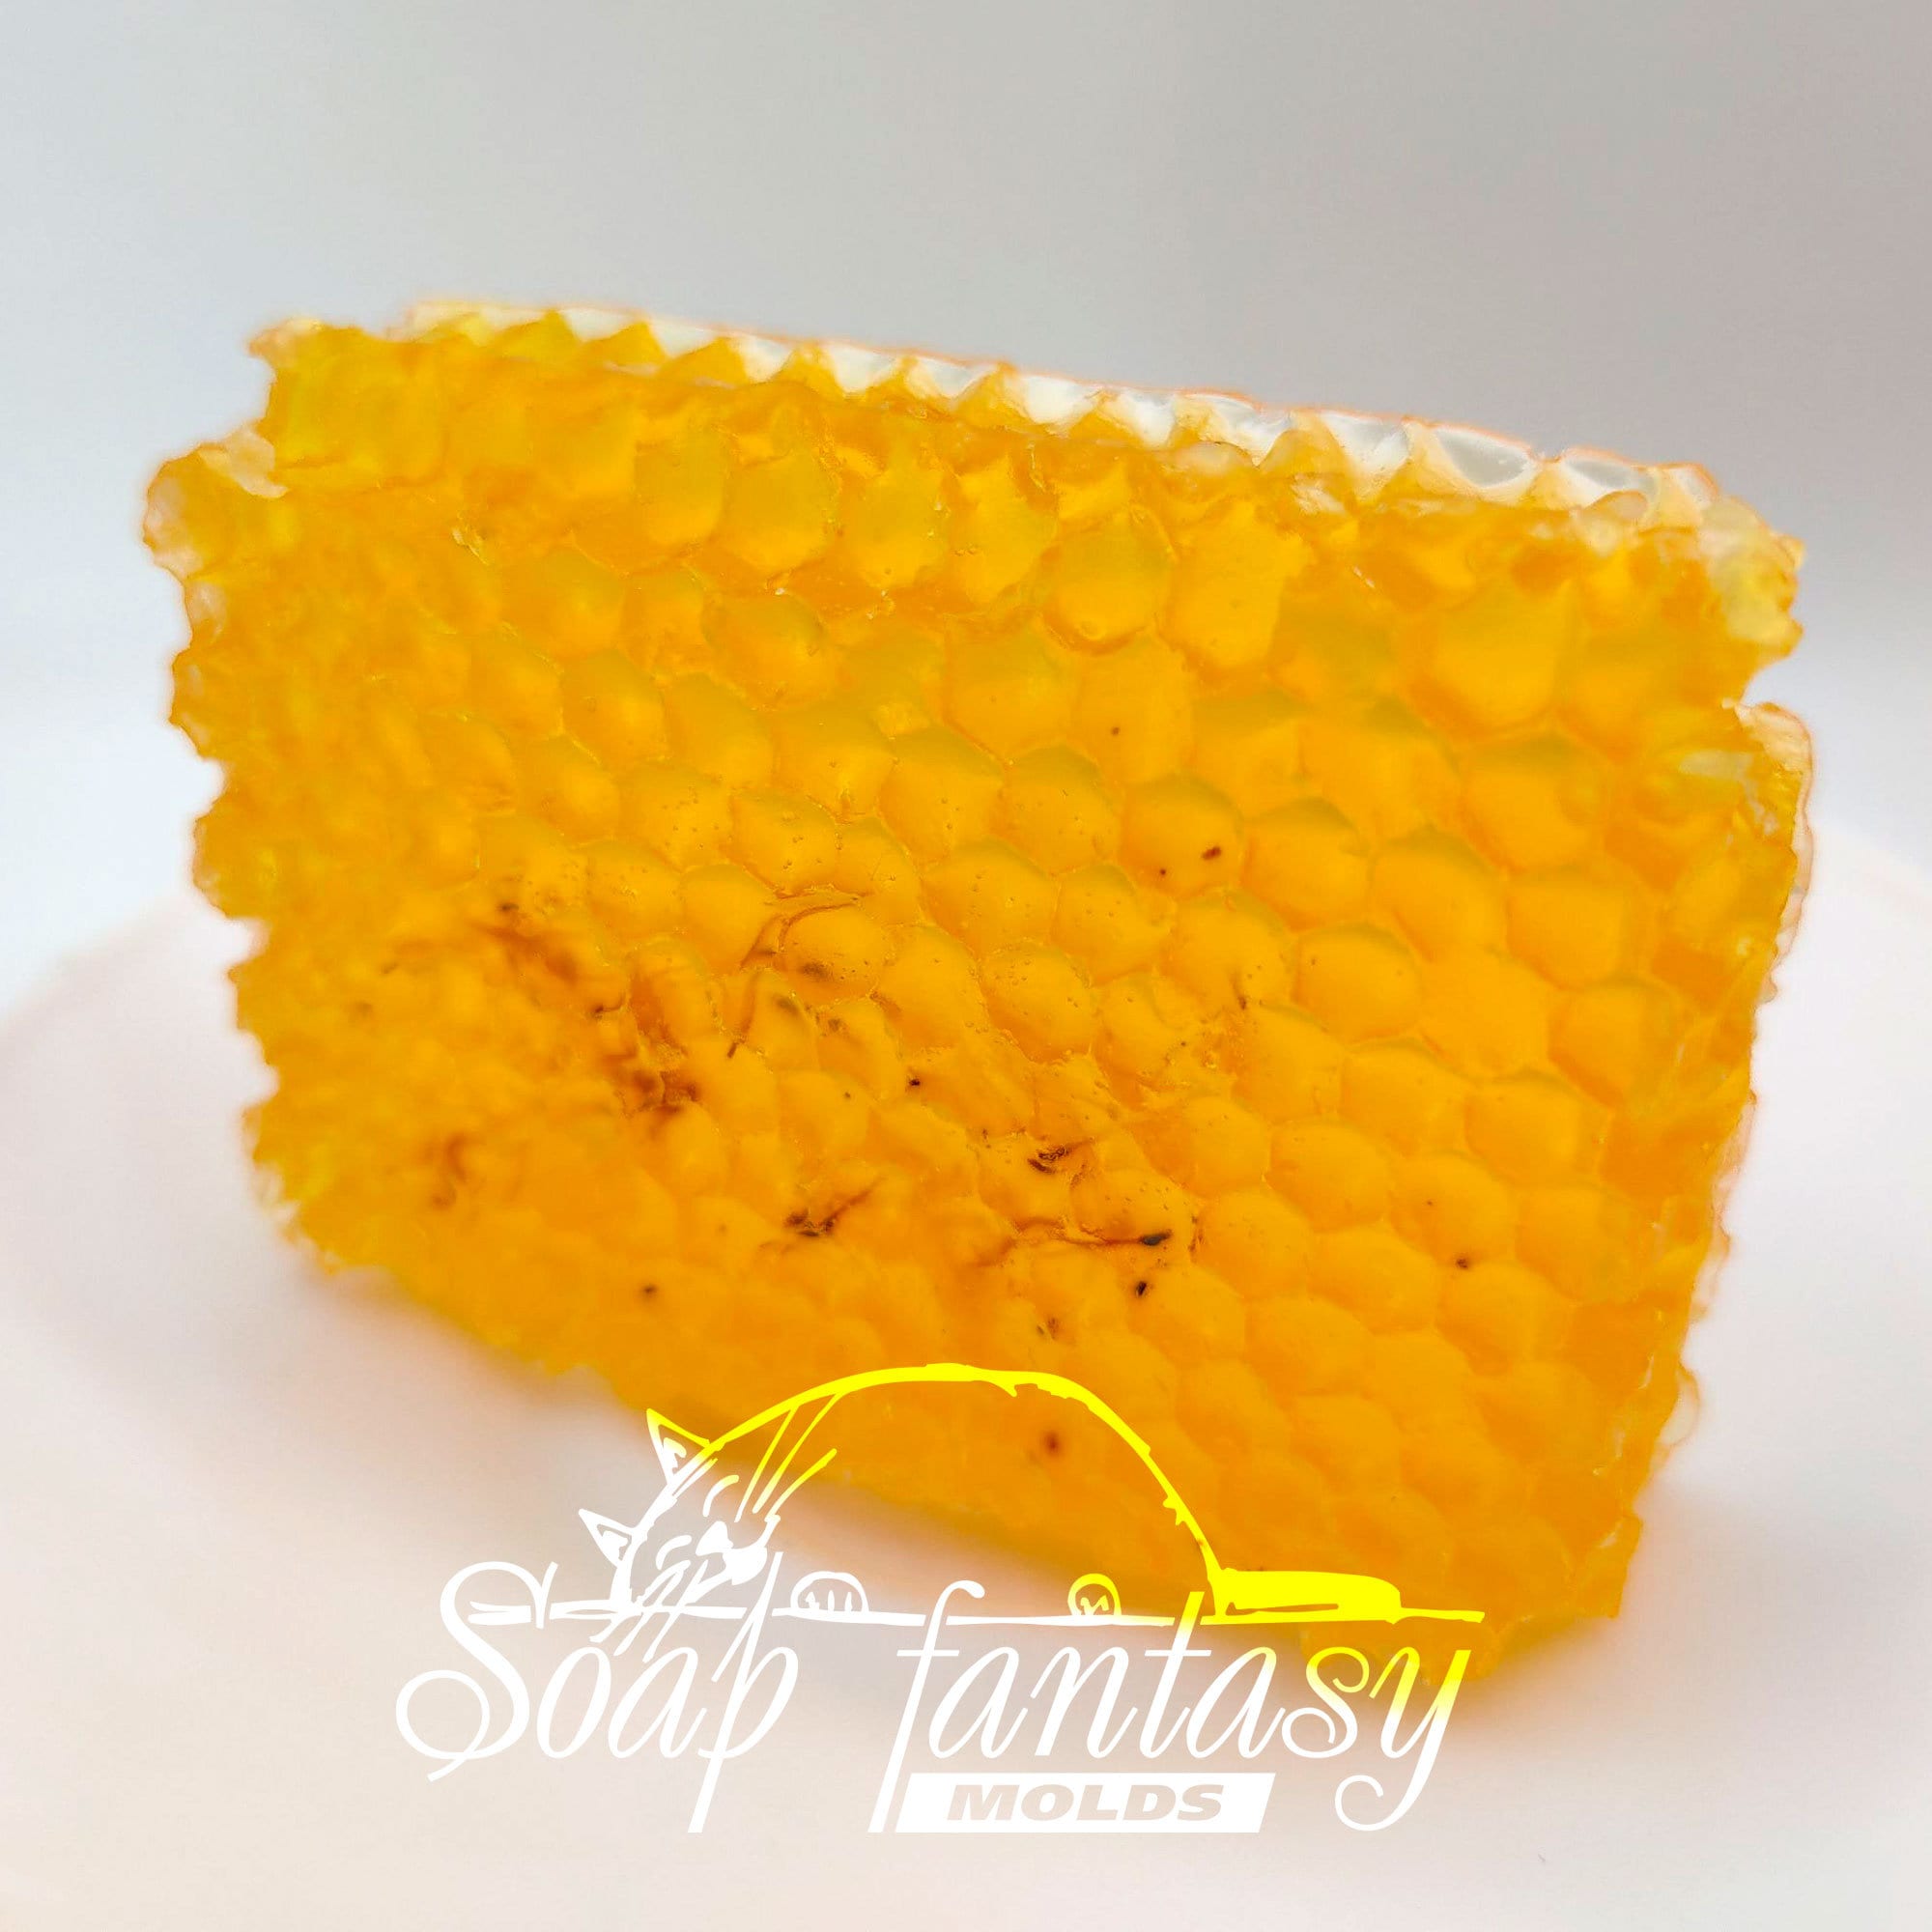 Octagon Honeycomb Soap & Wax Mold *Inventory Clearance*